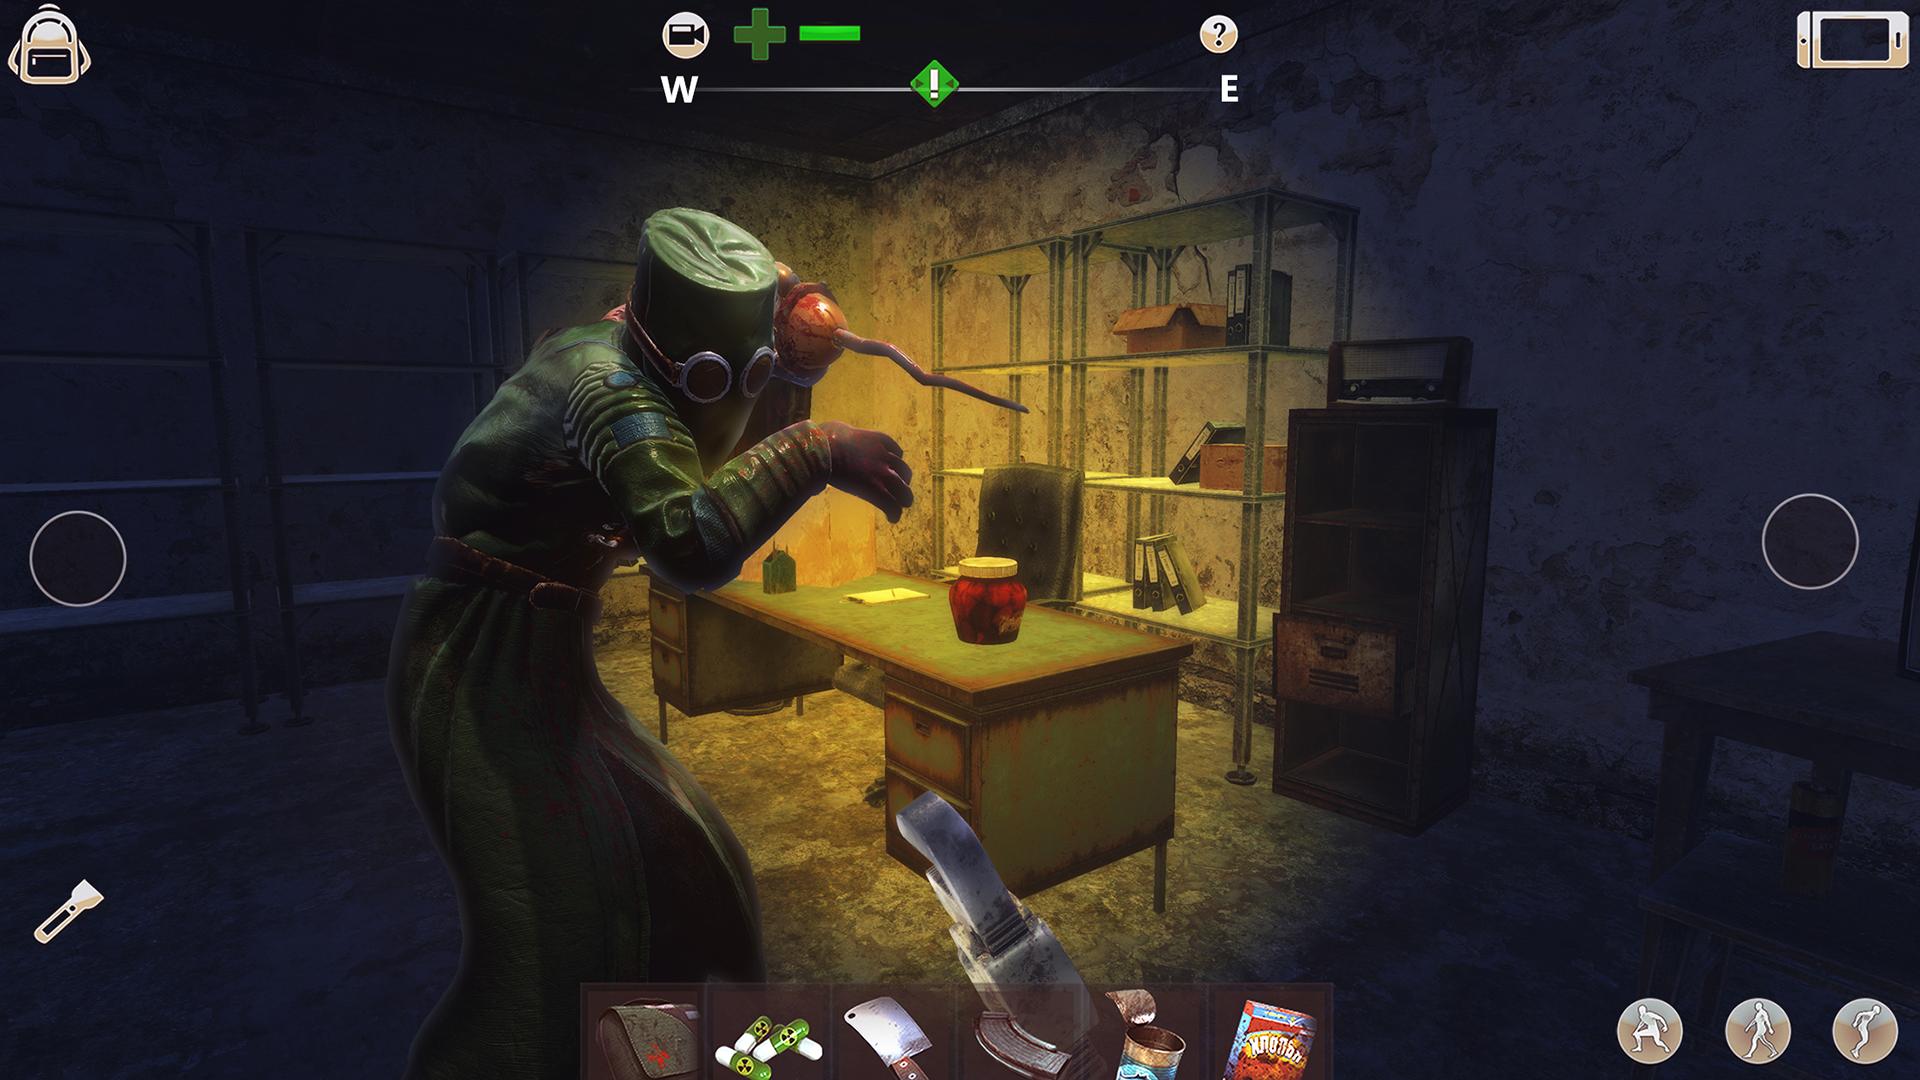 Radiation City Free for Android - APK Download